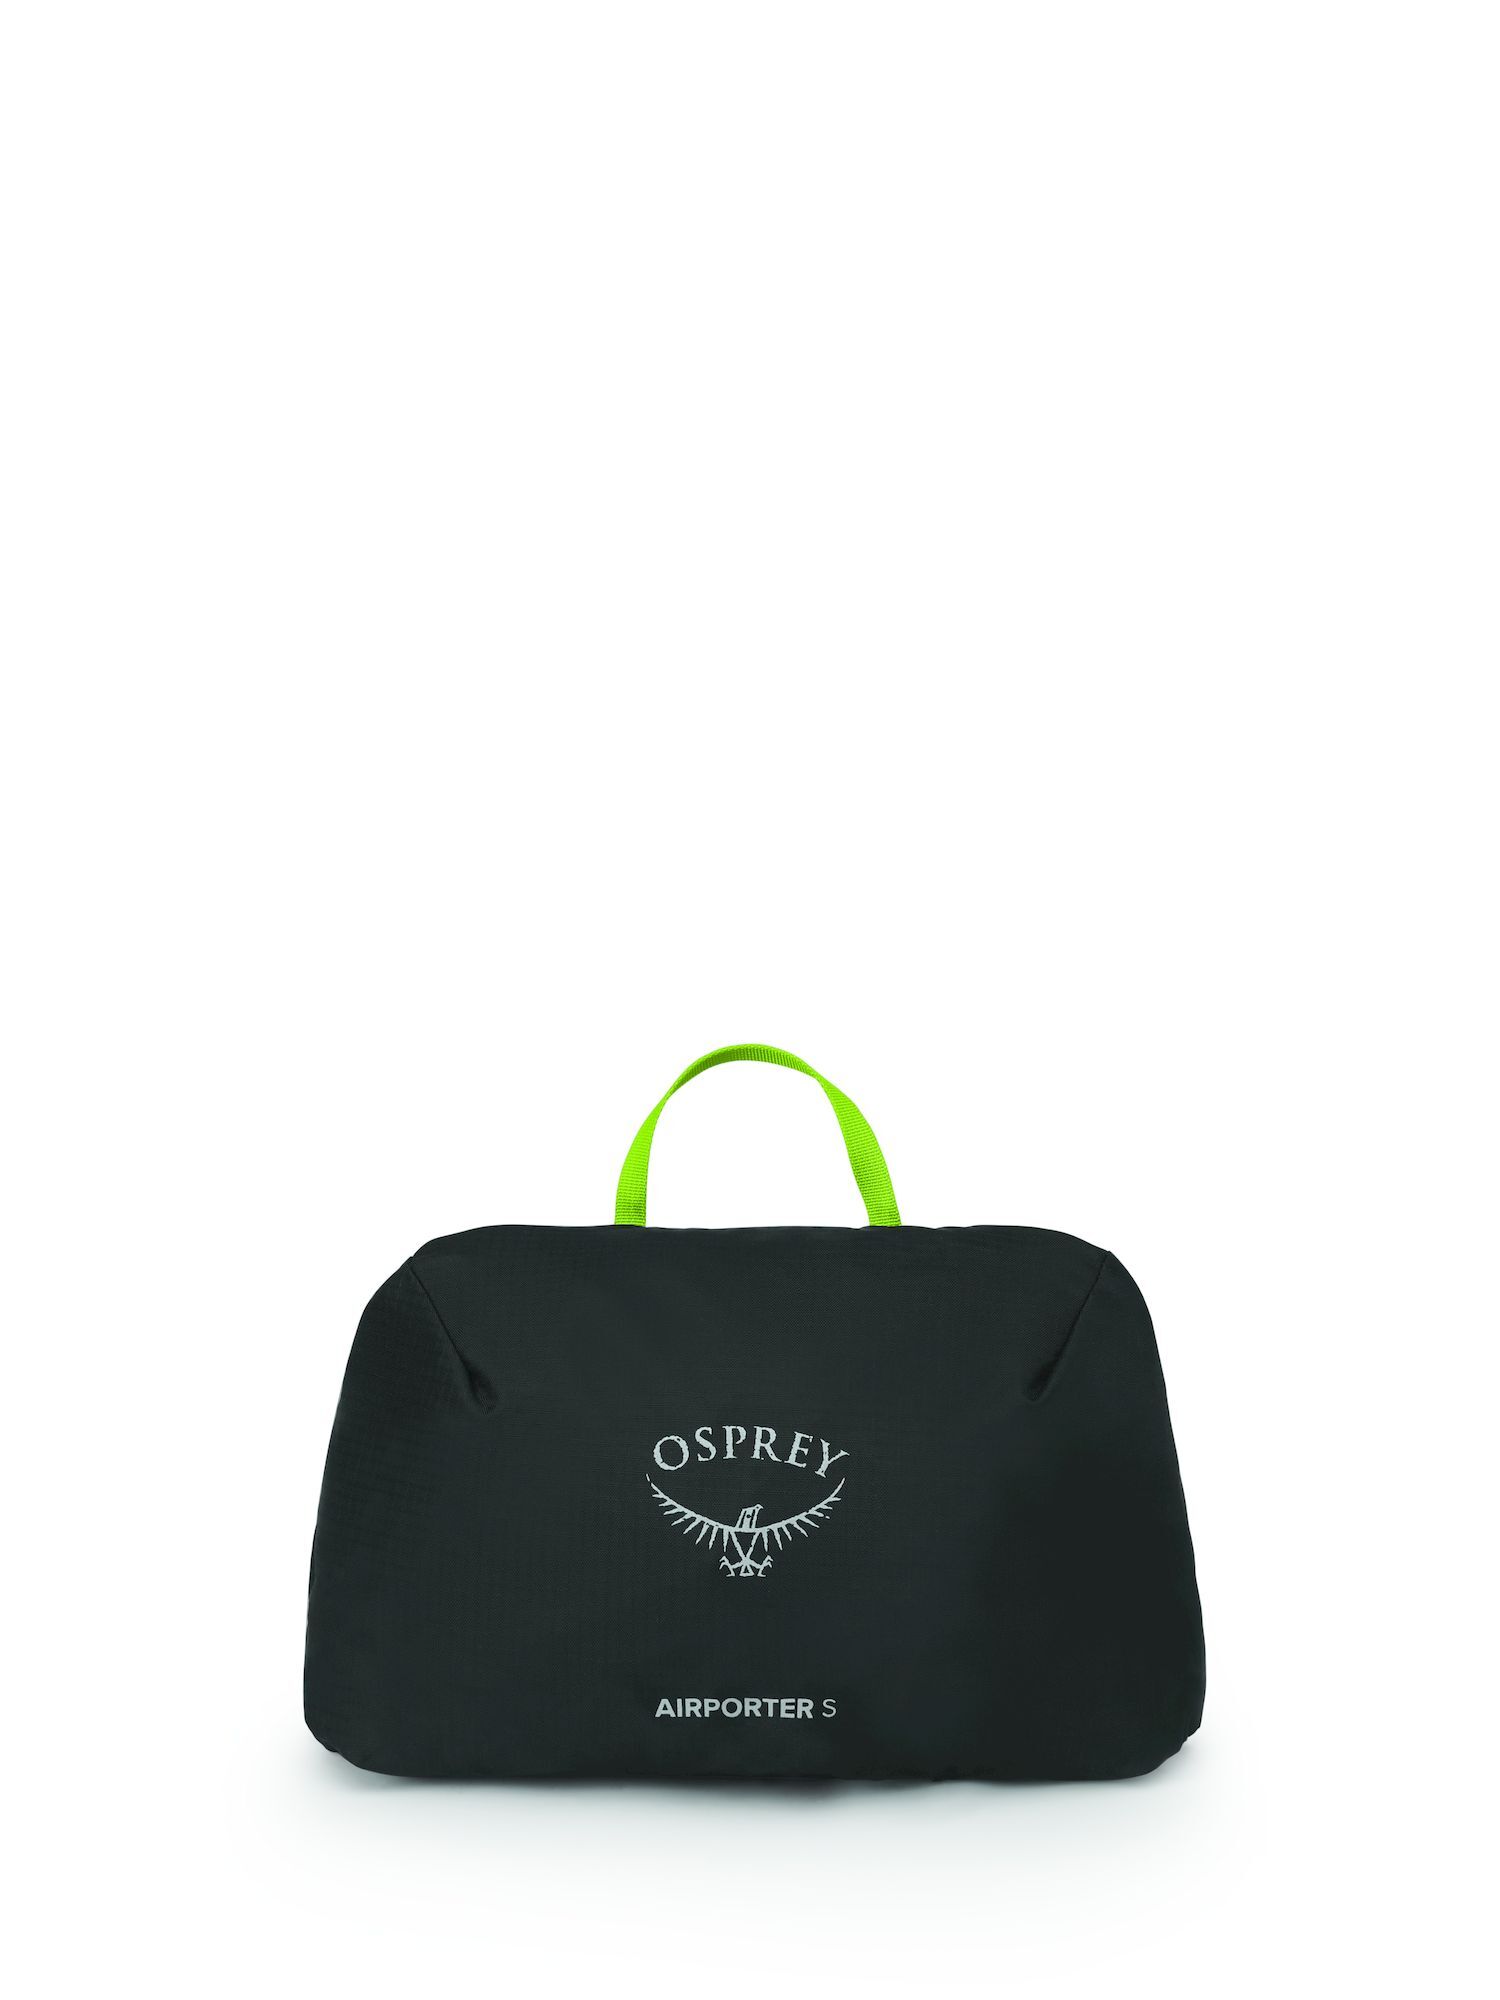 Osprey Airporter - Protection pluie sac à dos | Hardloop